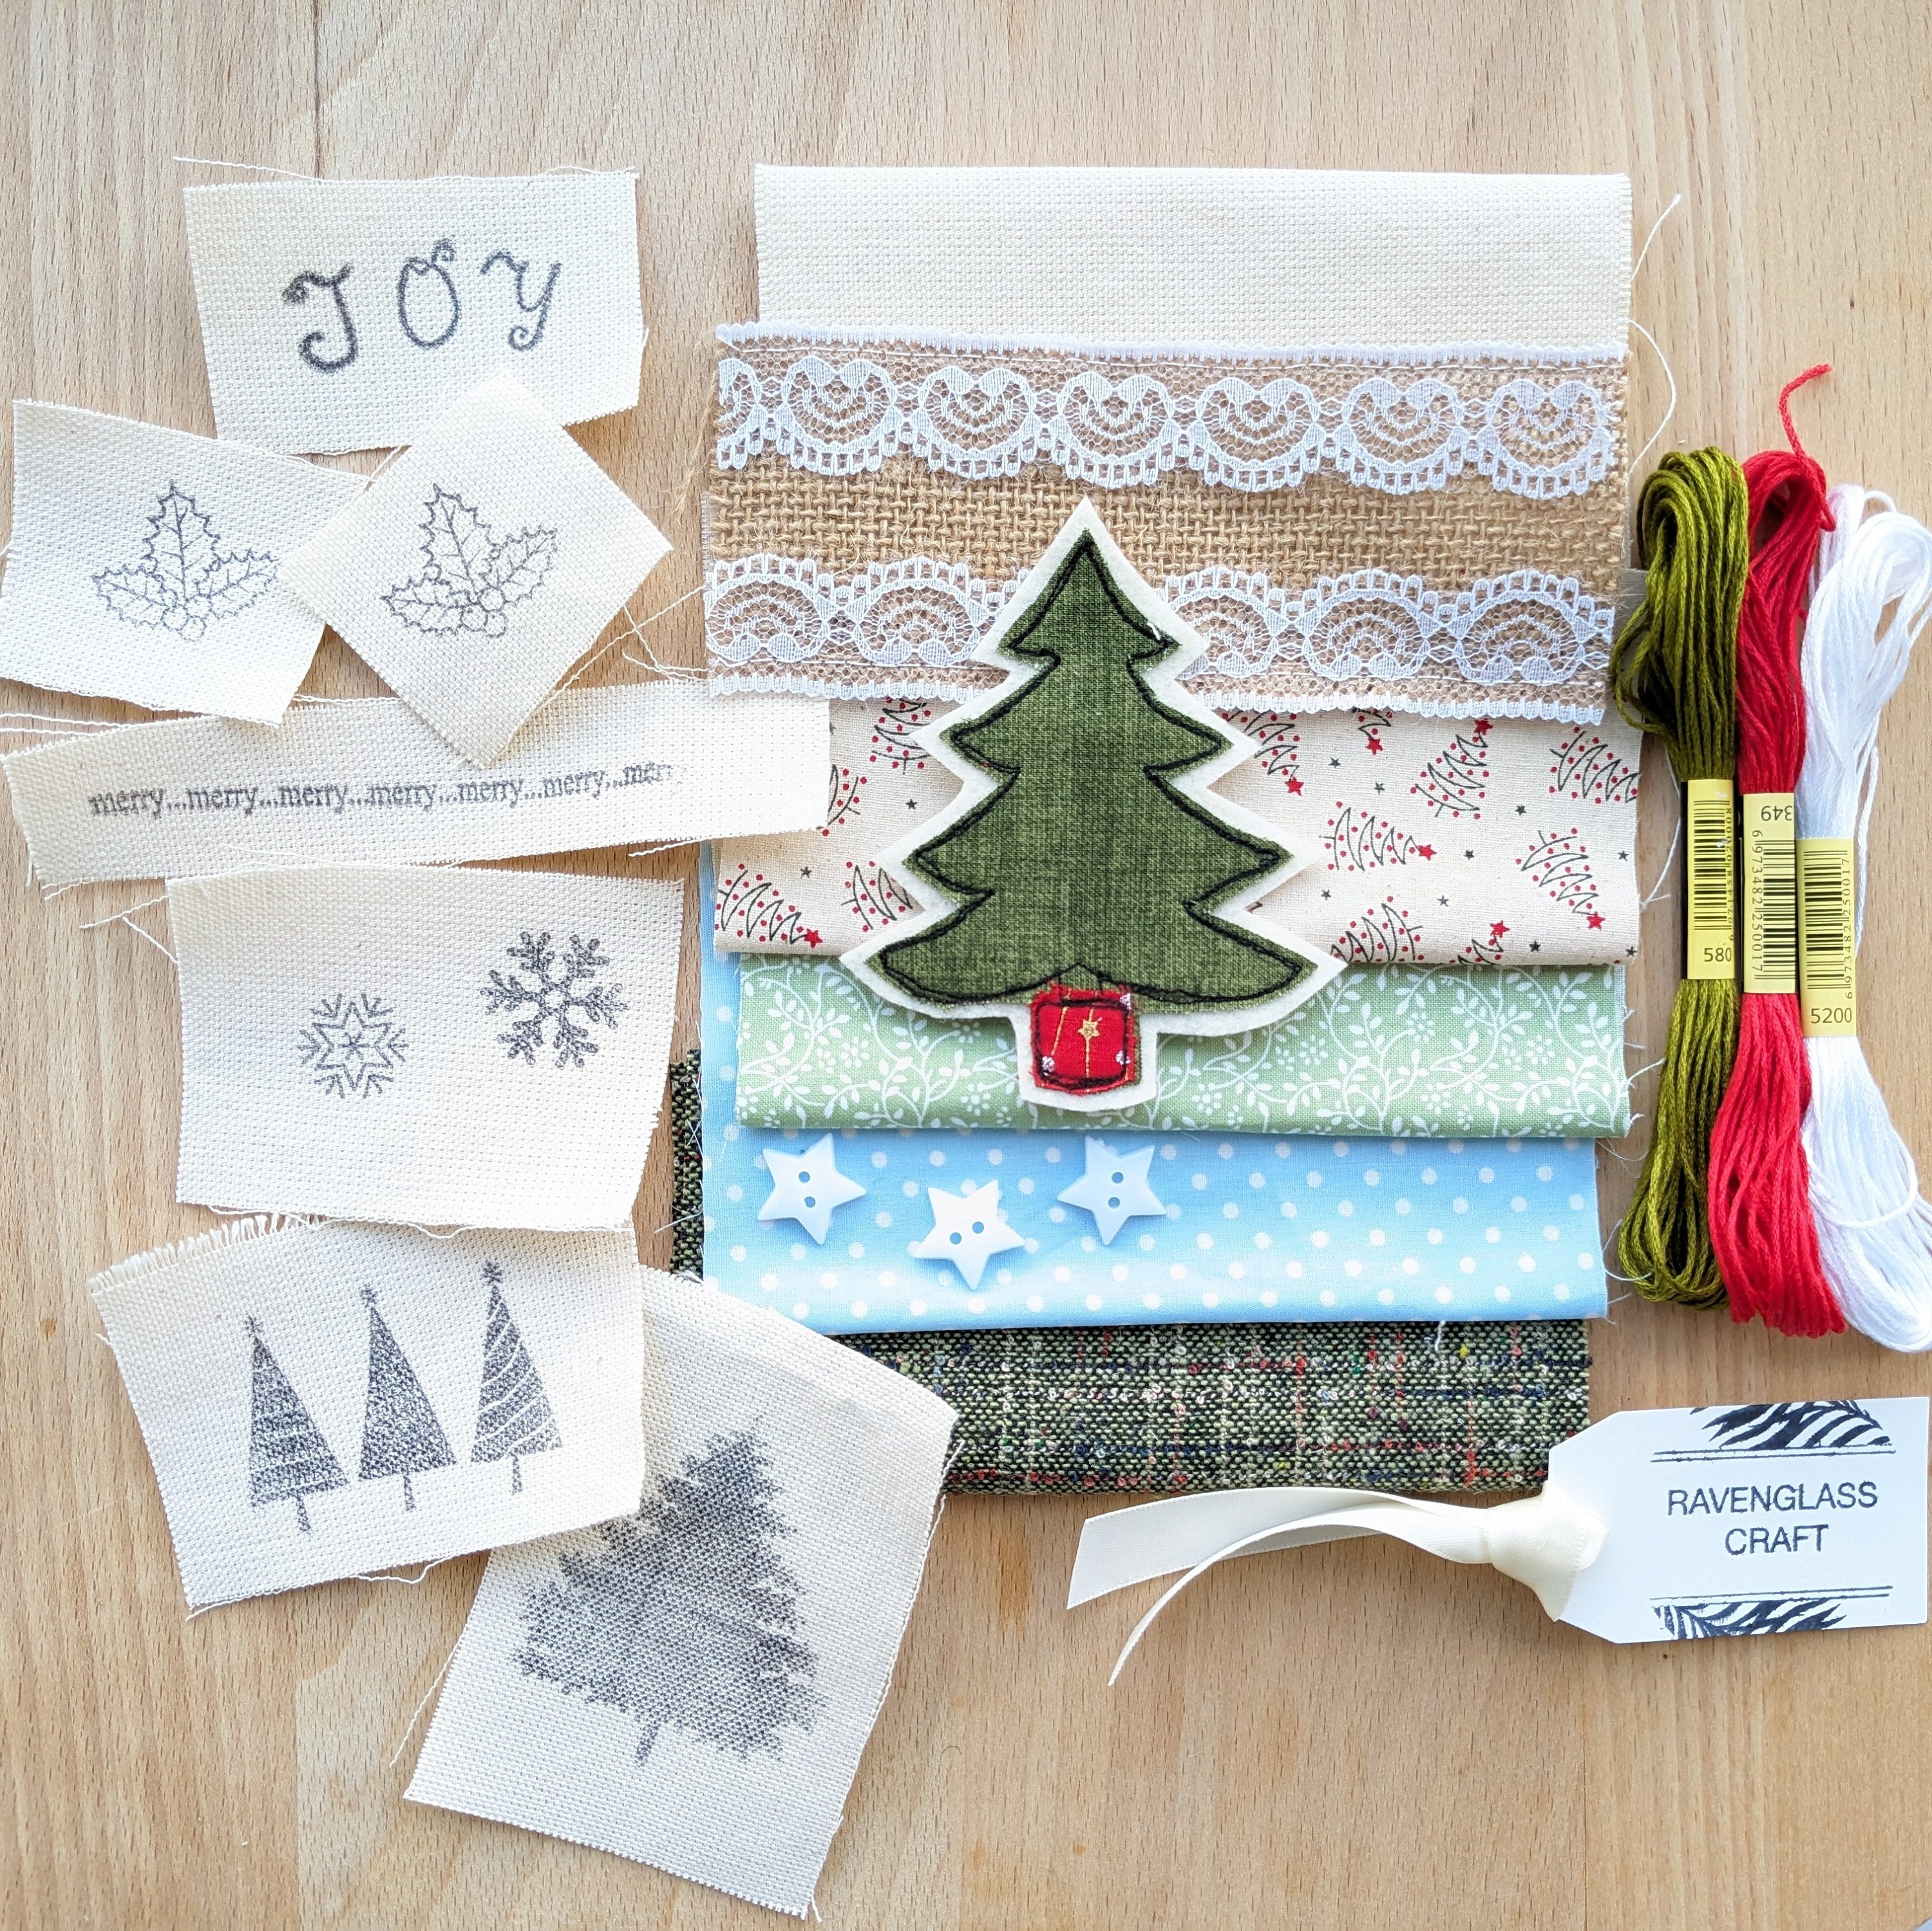 Holiday Gift Ideas for Your “Slow Stitching” Friends! - C&T Publishing